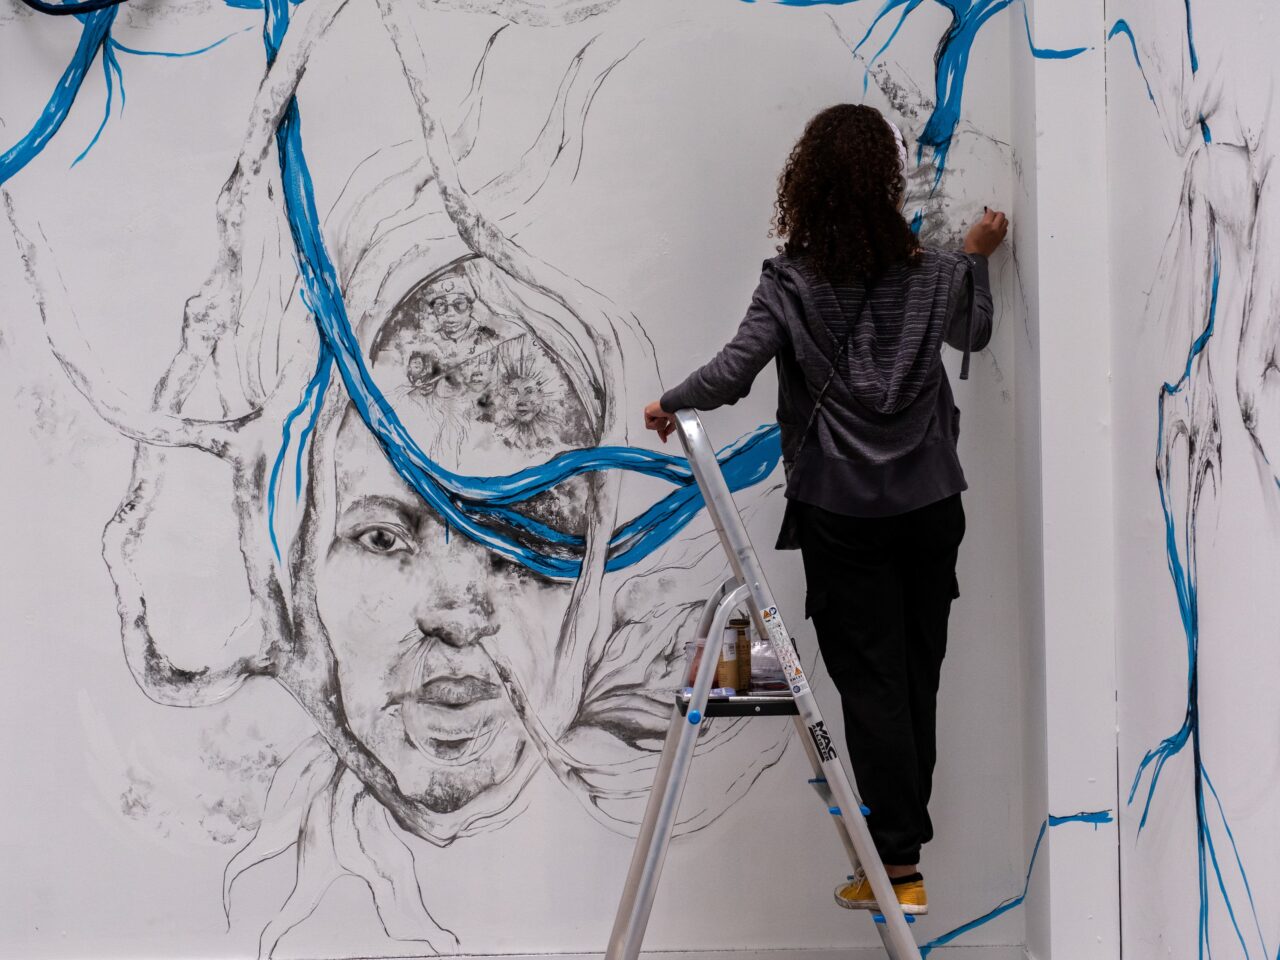 The artist Shannon Alonzo, standing on a ladder, wearing headphones and drawing with graphite onto a wall, creating a site-specific mural.